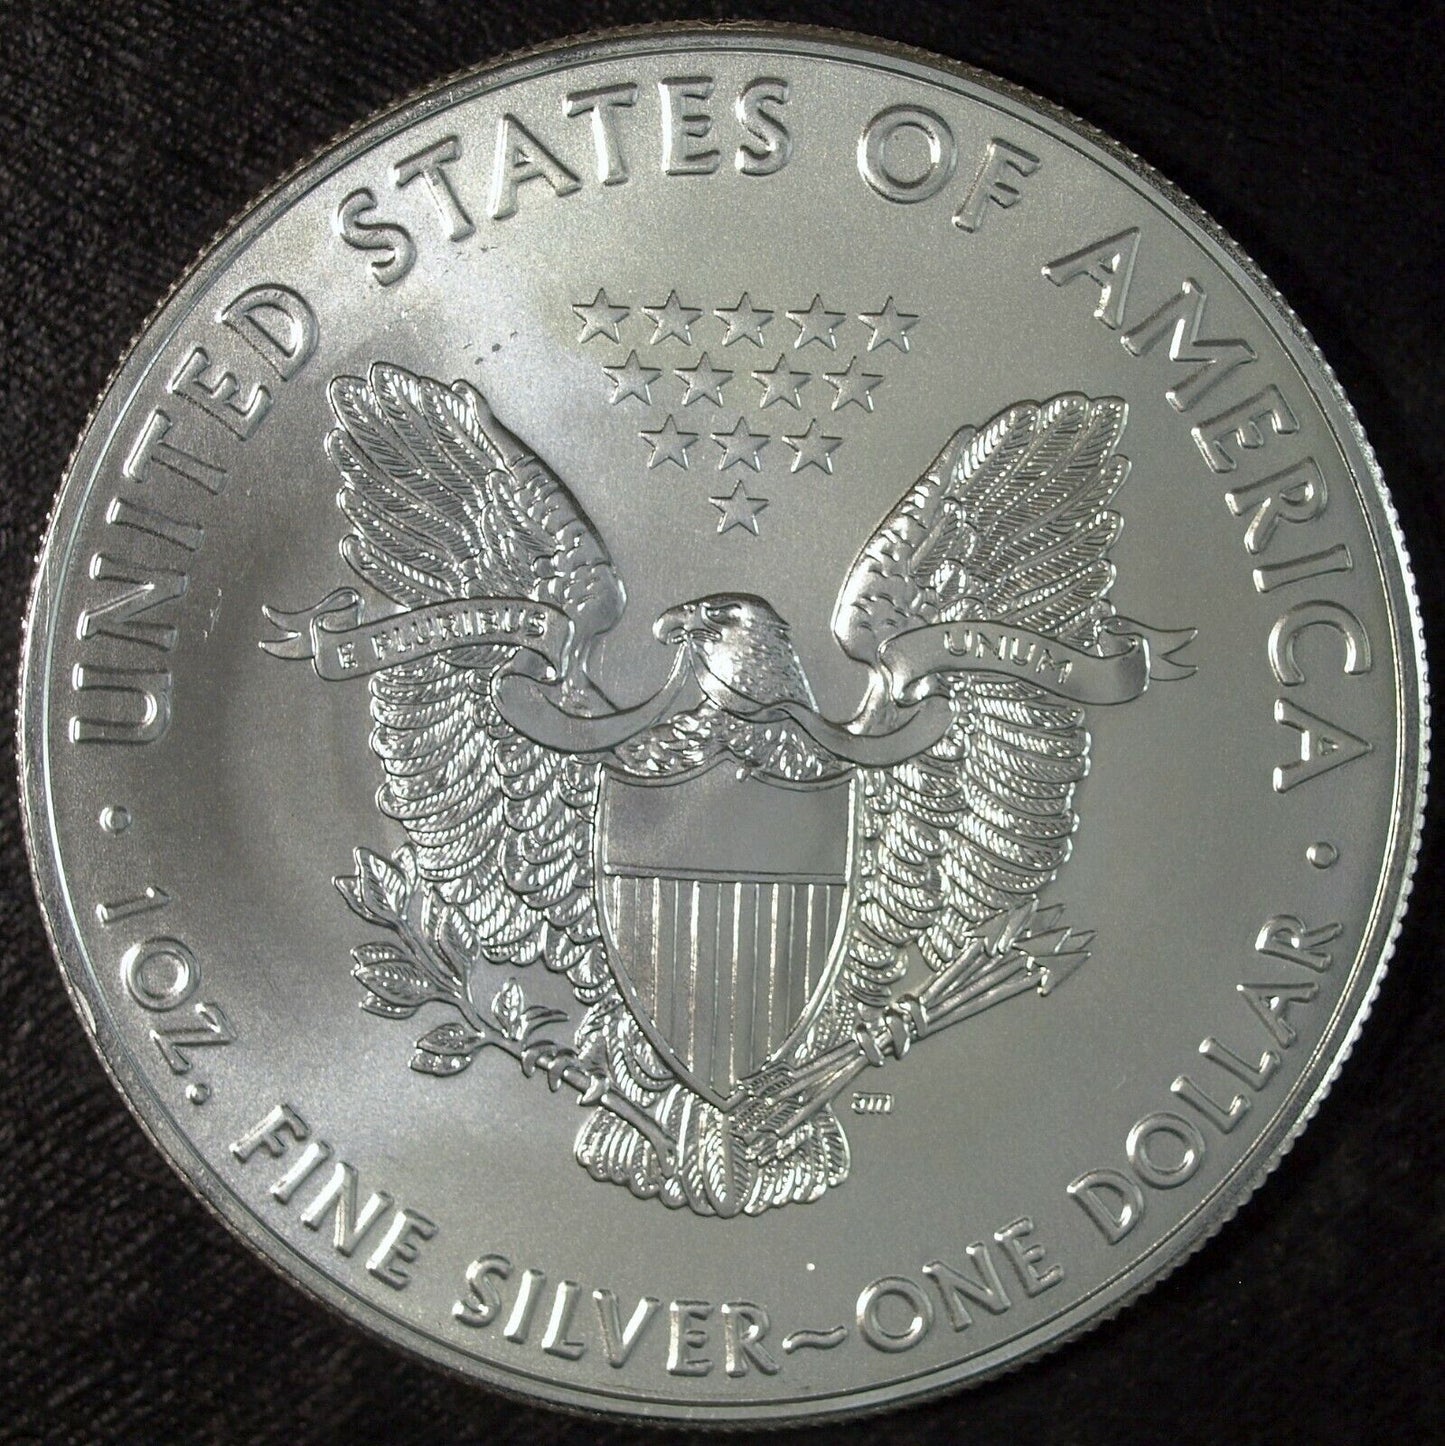 2016 American Silver Eagle ☆☆ Uncirculated ☆☆ Great Collectible 492